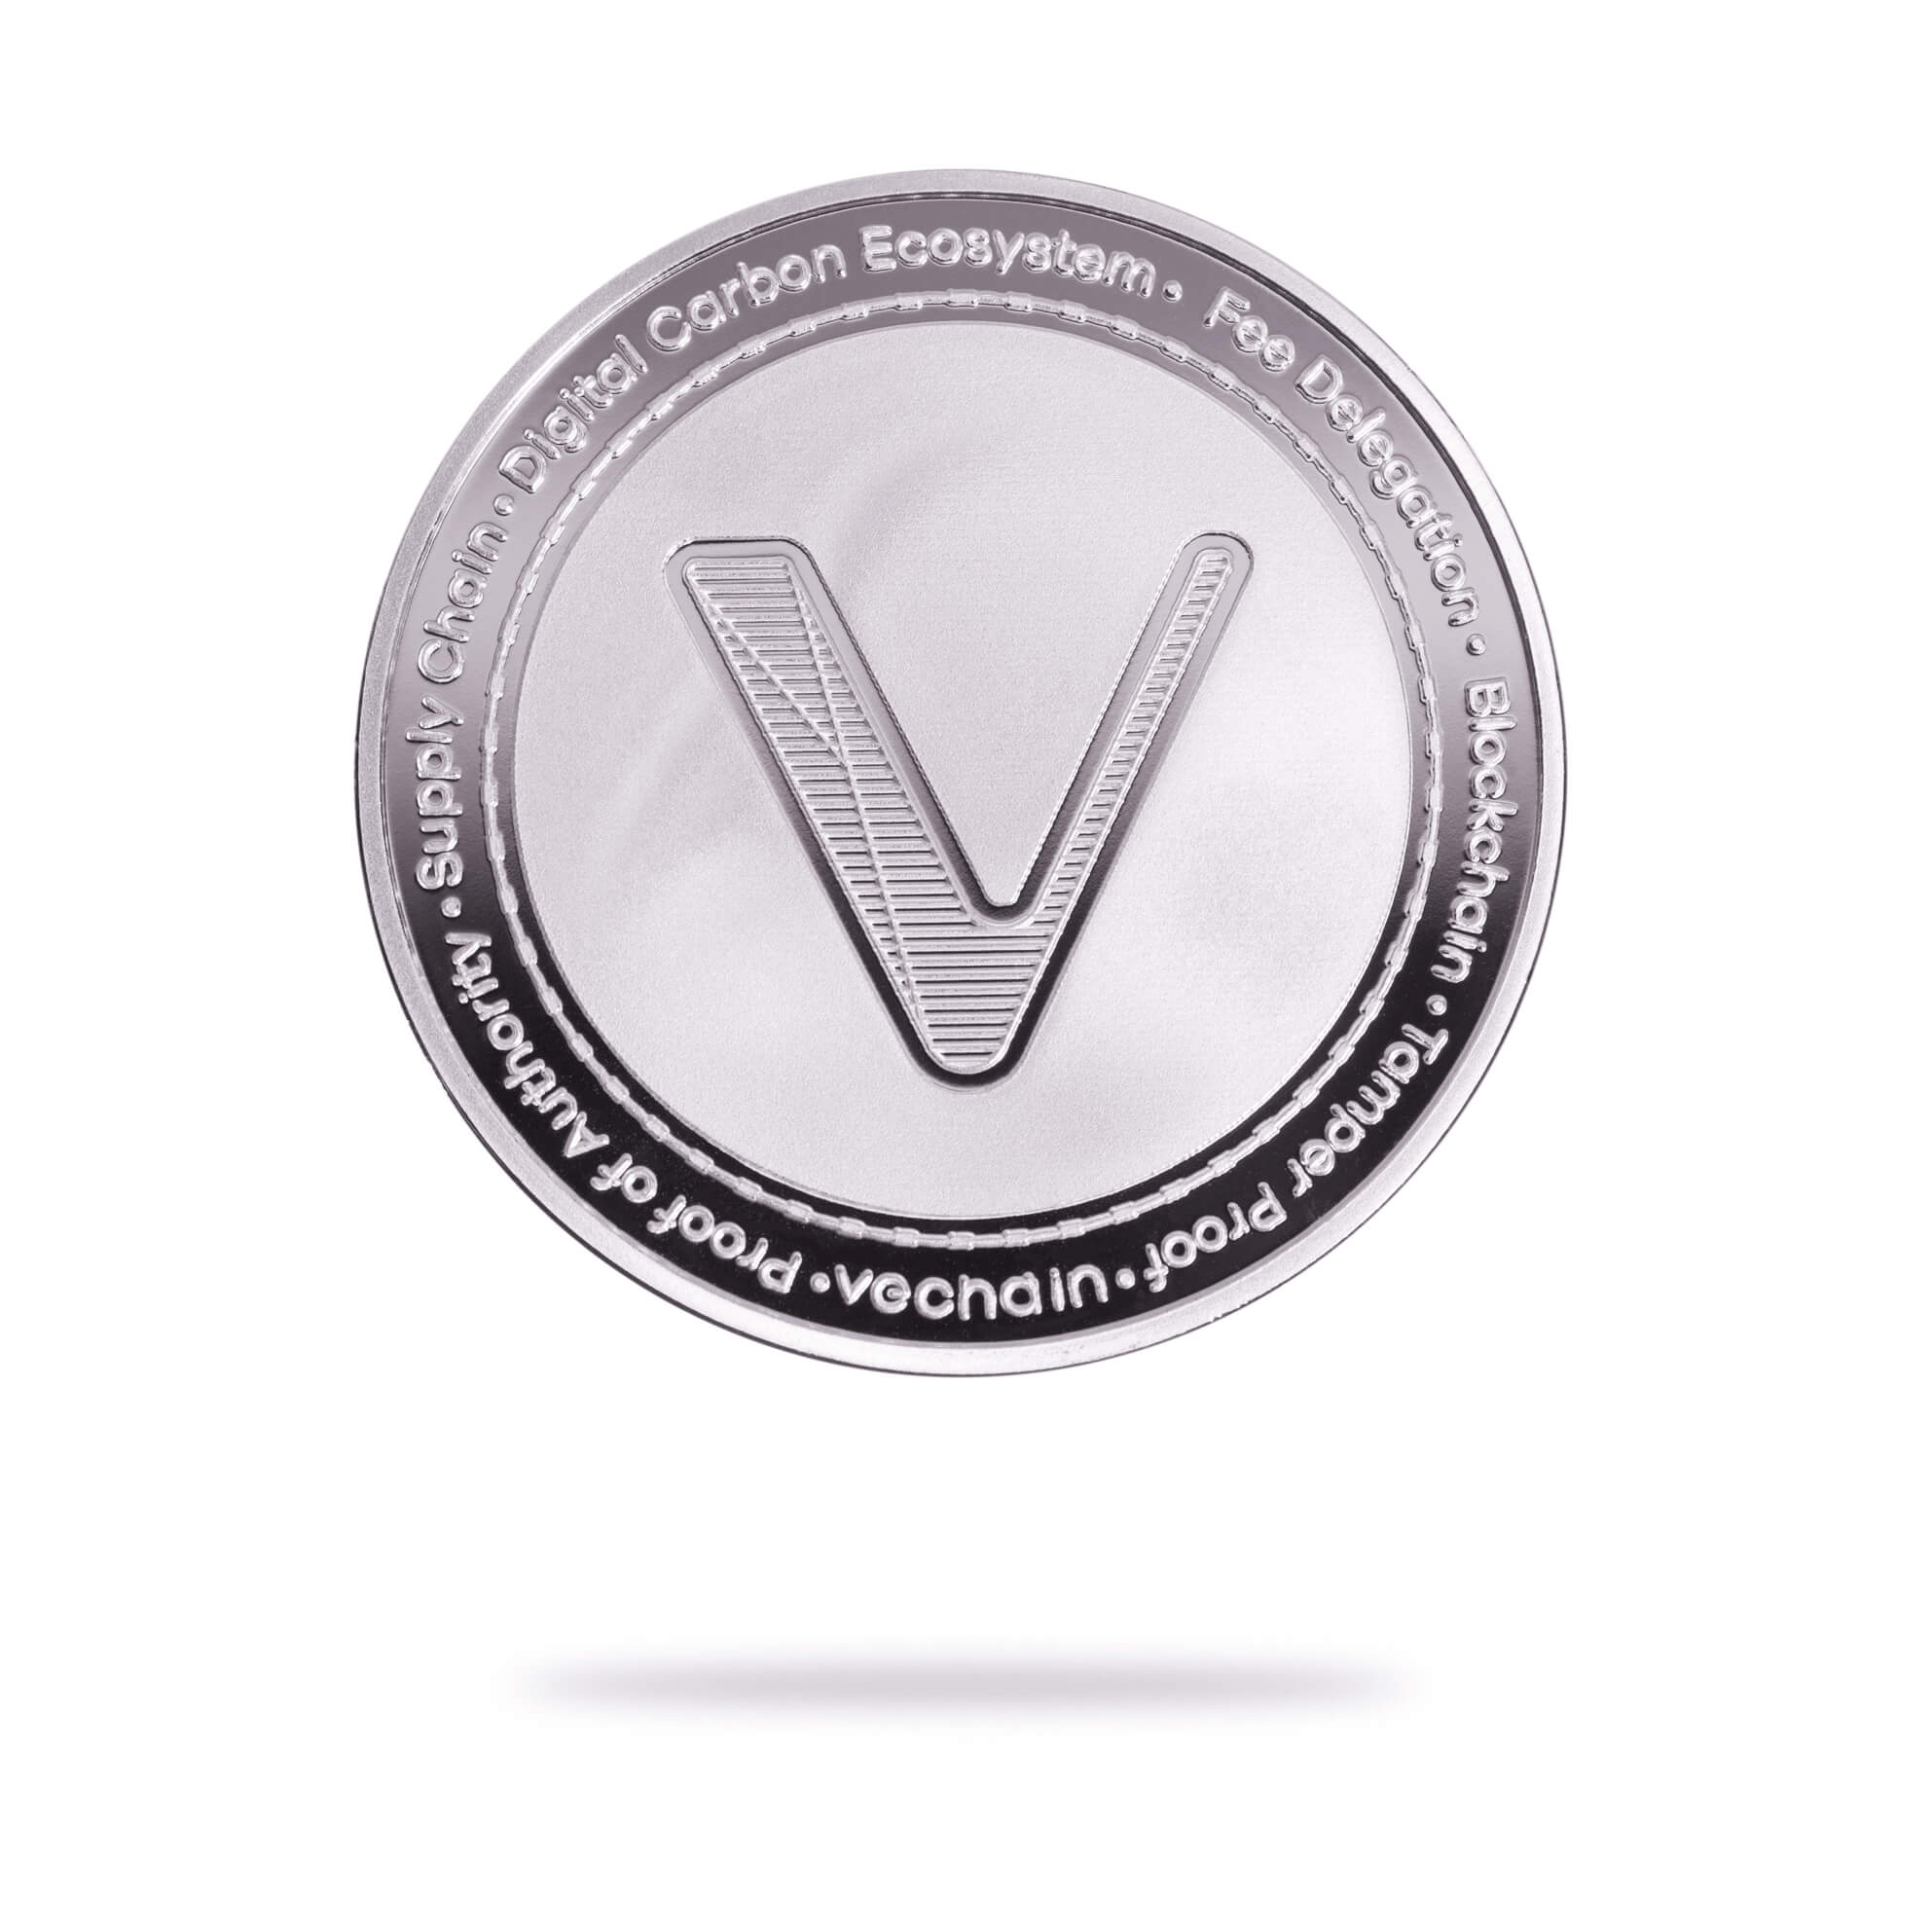 Cryptochips | VeChain Physical Crypto Coin. Collectable cryptocurrency merch you can hodl